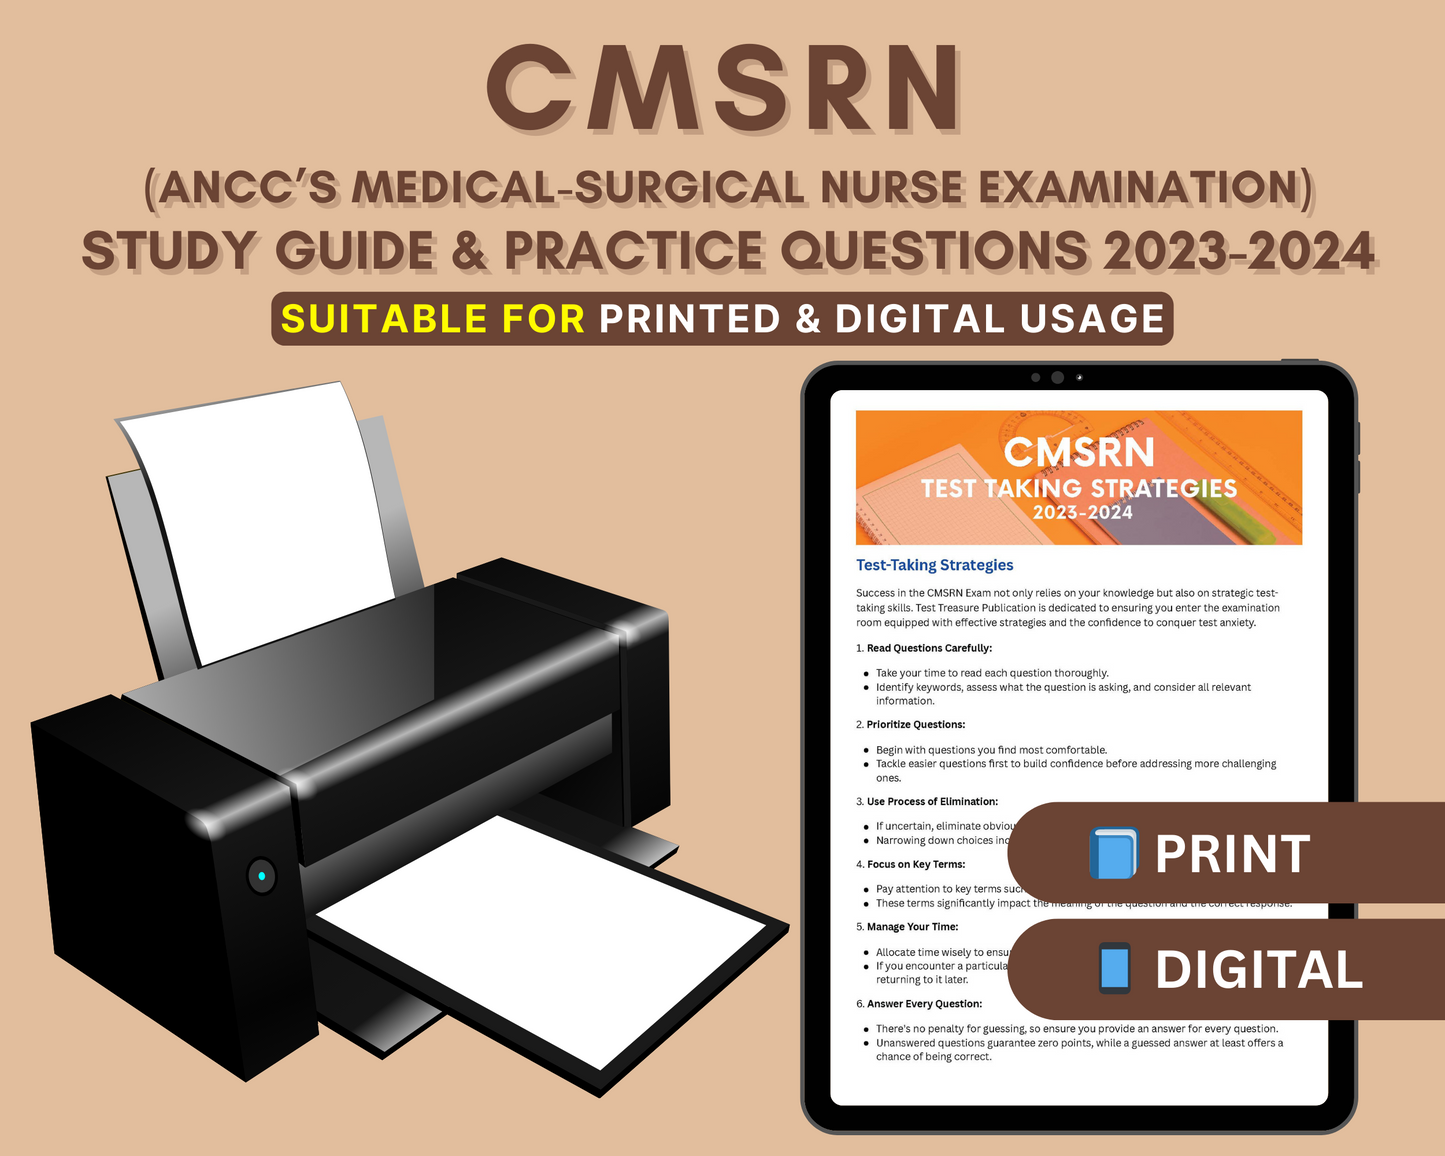 CMSRN Study Guide 2023-2024: In-Depth Content Review, Practice Tests & Exam Tips for Medical-Surgical Nurse Exam Prep